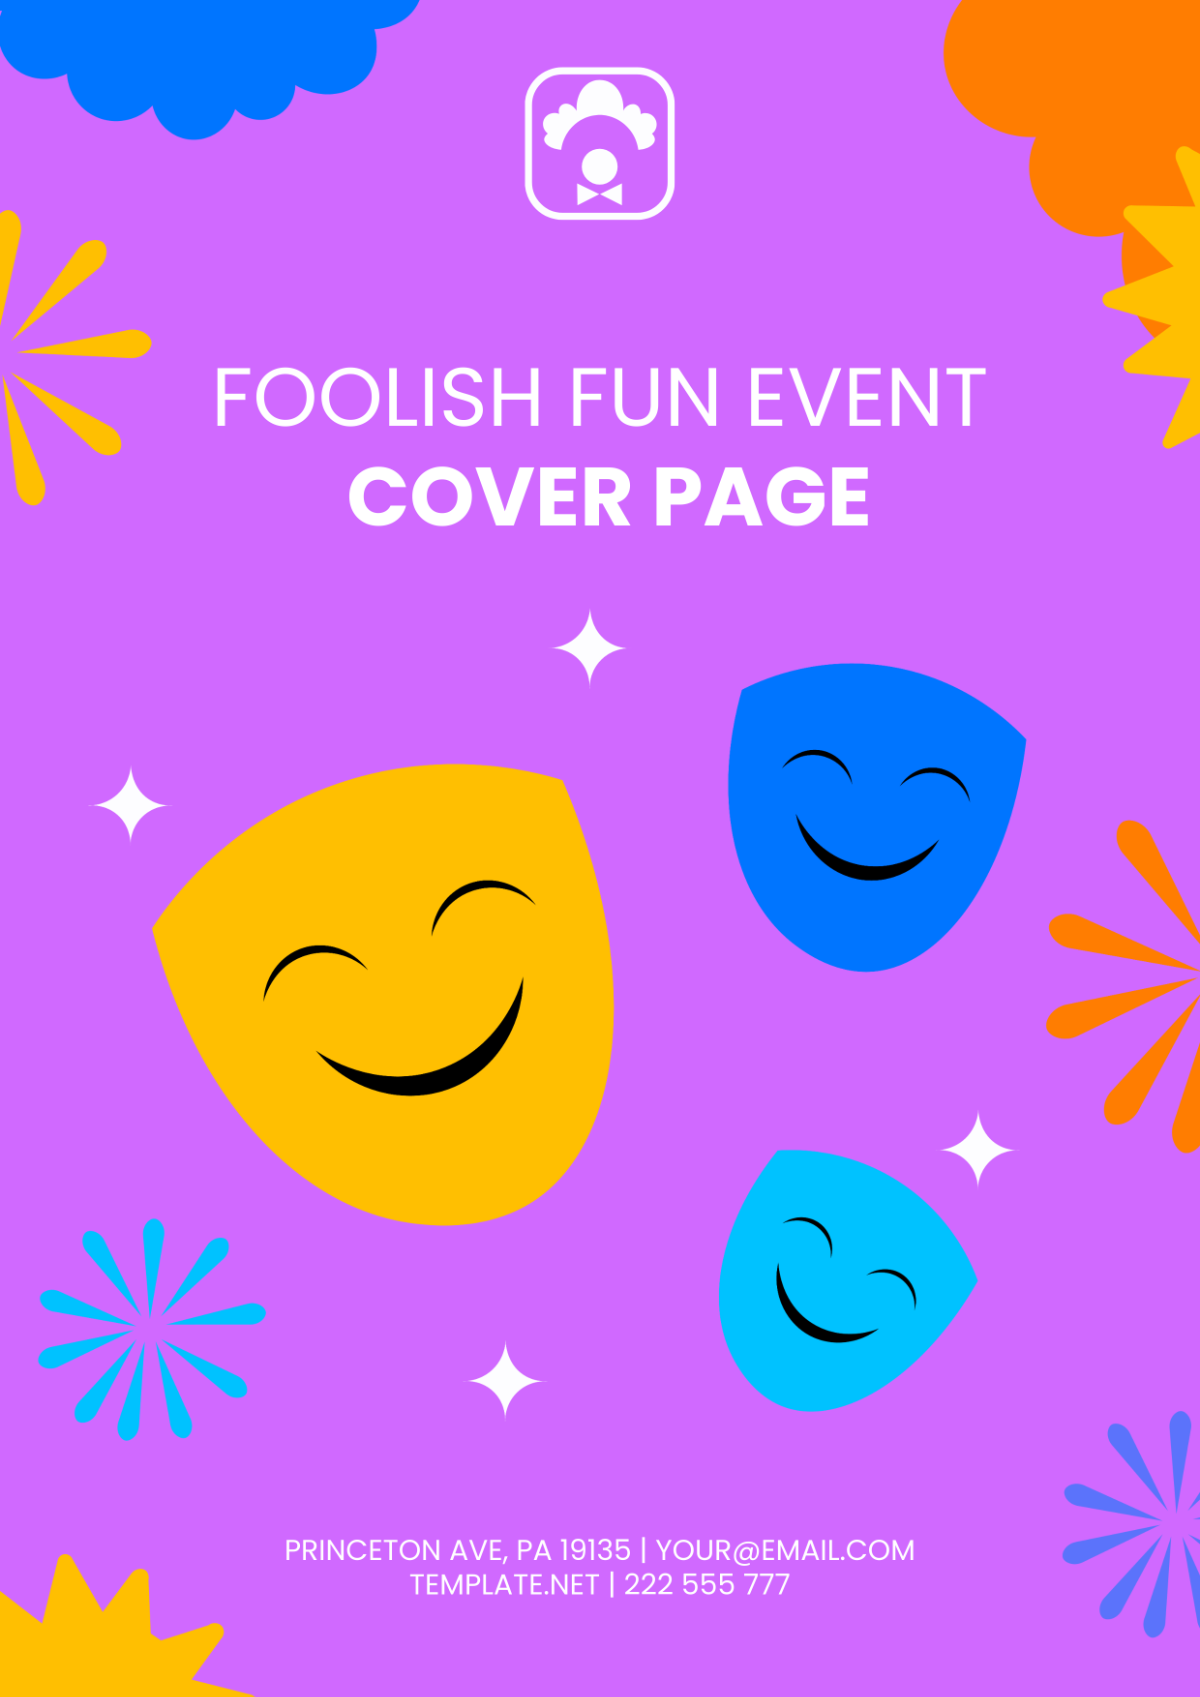 Foolish Fun Event Cover Page